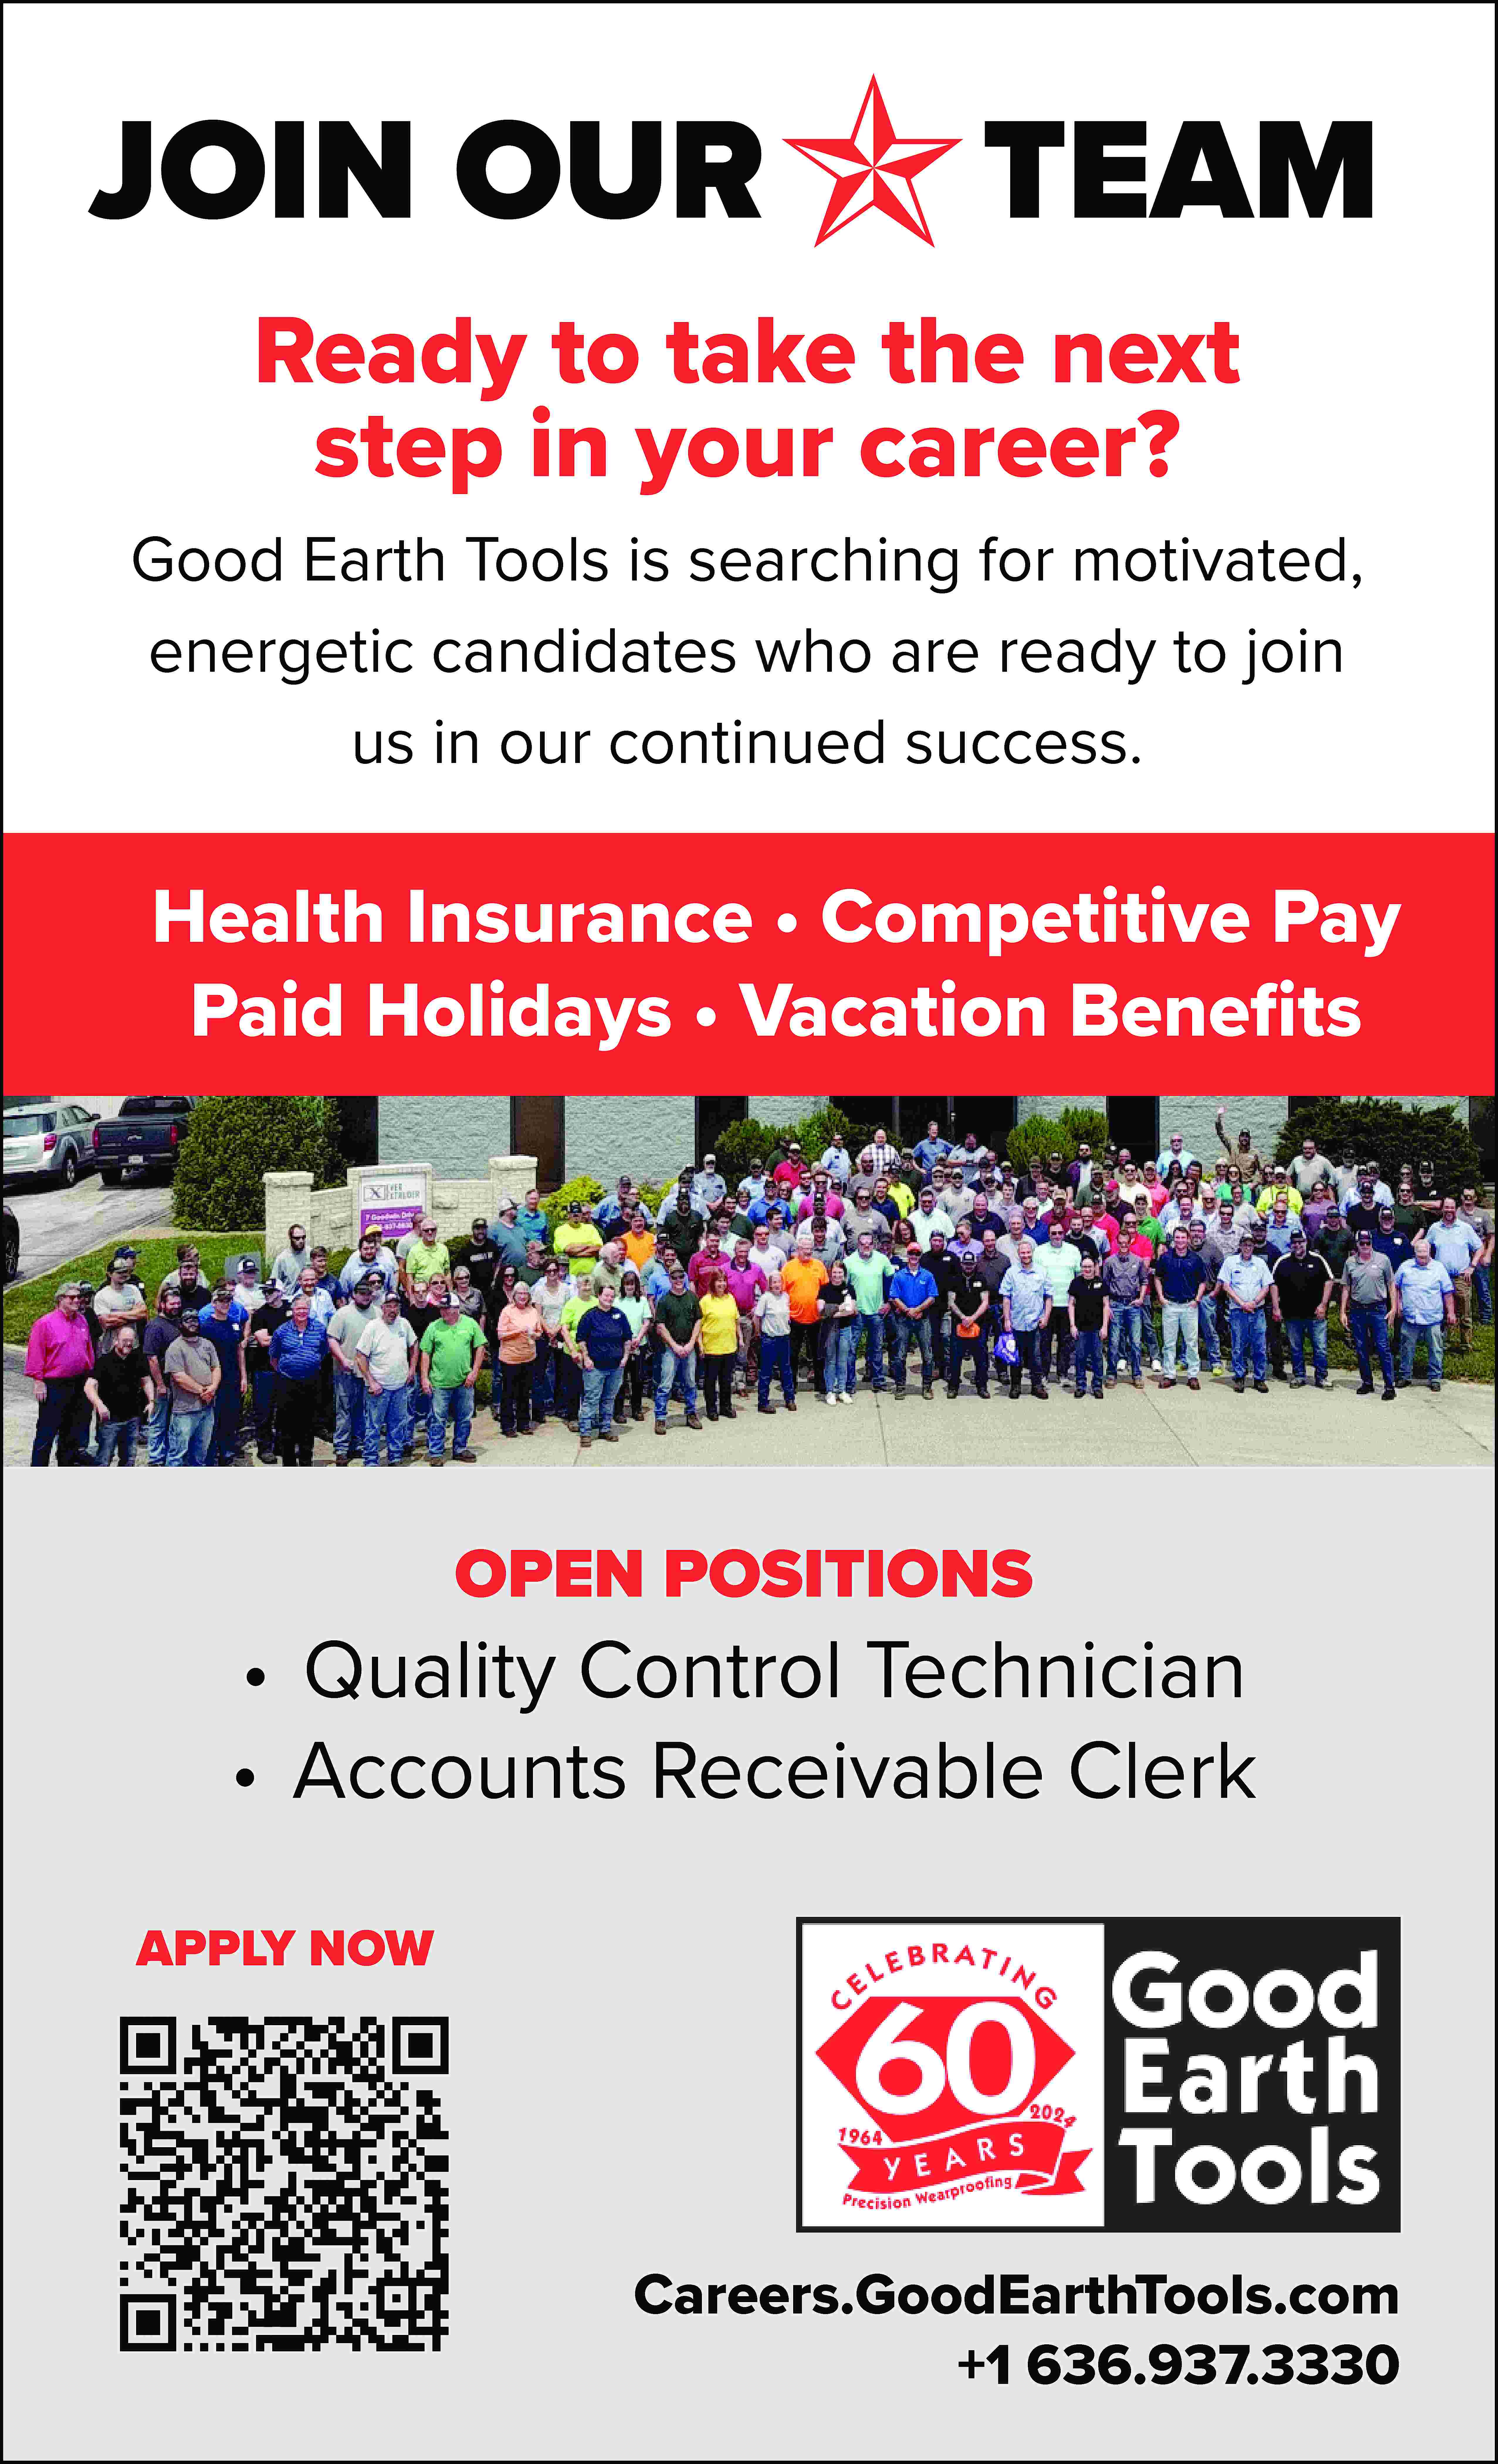 JOIN OUR TEAM Ready to  JOIN OUR TEAM Ready to take the next step in your career? Good Earth Tools is searching for motivated, energetic candidates who are ready to join us in our continued success. Health Insurance • Competitive Pay Paid Holidays • Vacation Benefits OPEN POSITIONS • Quality Control Technician • Accounts Receivable Clerk APPLY NOW Careers.GoodEarthTools.com +1 636.937.3330